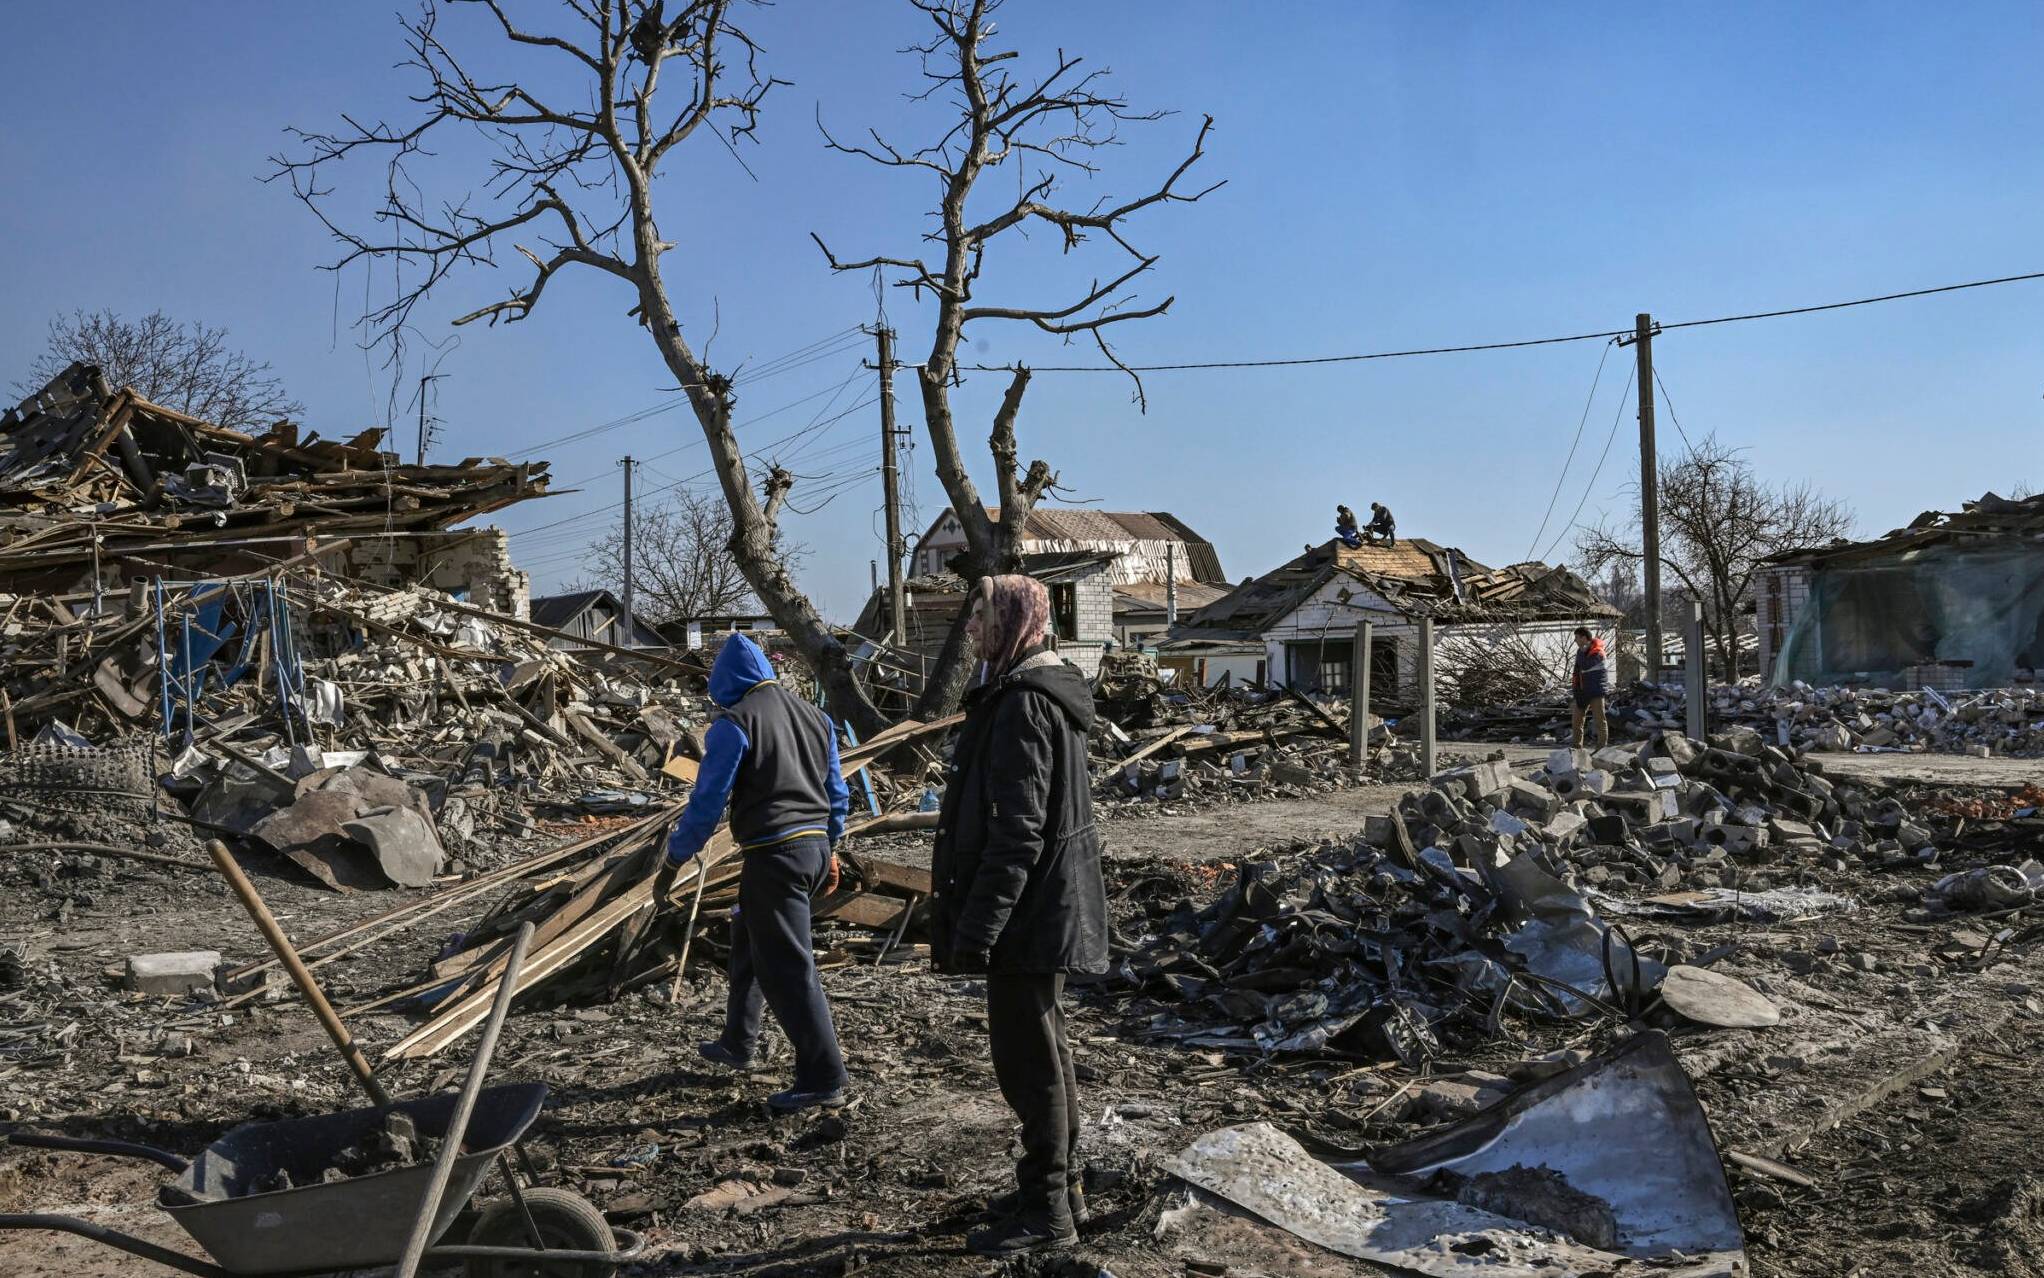 People clean up the debris from destroyed houses after bombardments in the village of Krasylivka, east of Kyiv, on March 20, 2022, as Russian forces try to encircle the Ukranian capital. - The war in Ukraine, which Russian President Vladimir Putin launched on February 24 to stamp out the pro-Western leanings in the ex-Soviet country, has sparked the fastest growing refugee crisis in Europe since World War II, felled Russia-West relations to Cold War-era lows, and is wreaking havoc in the world economy still recovering from the coronavirus pandemic. (Photo by Aris Messinis / AFP)